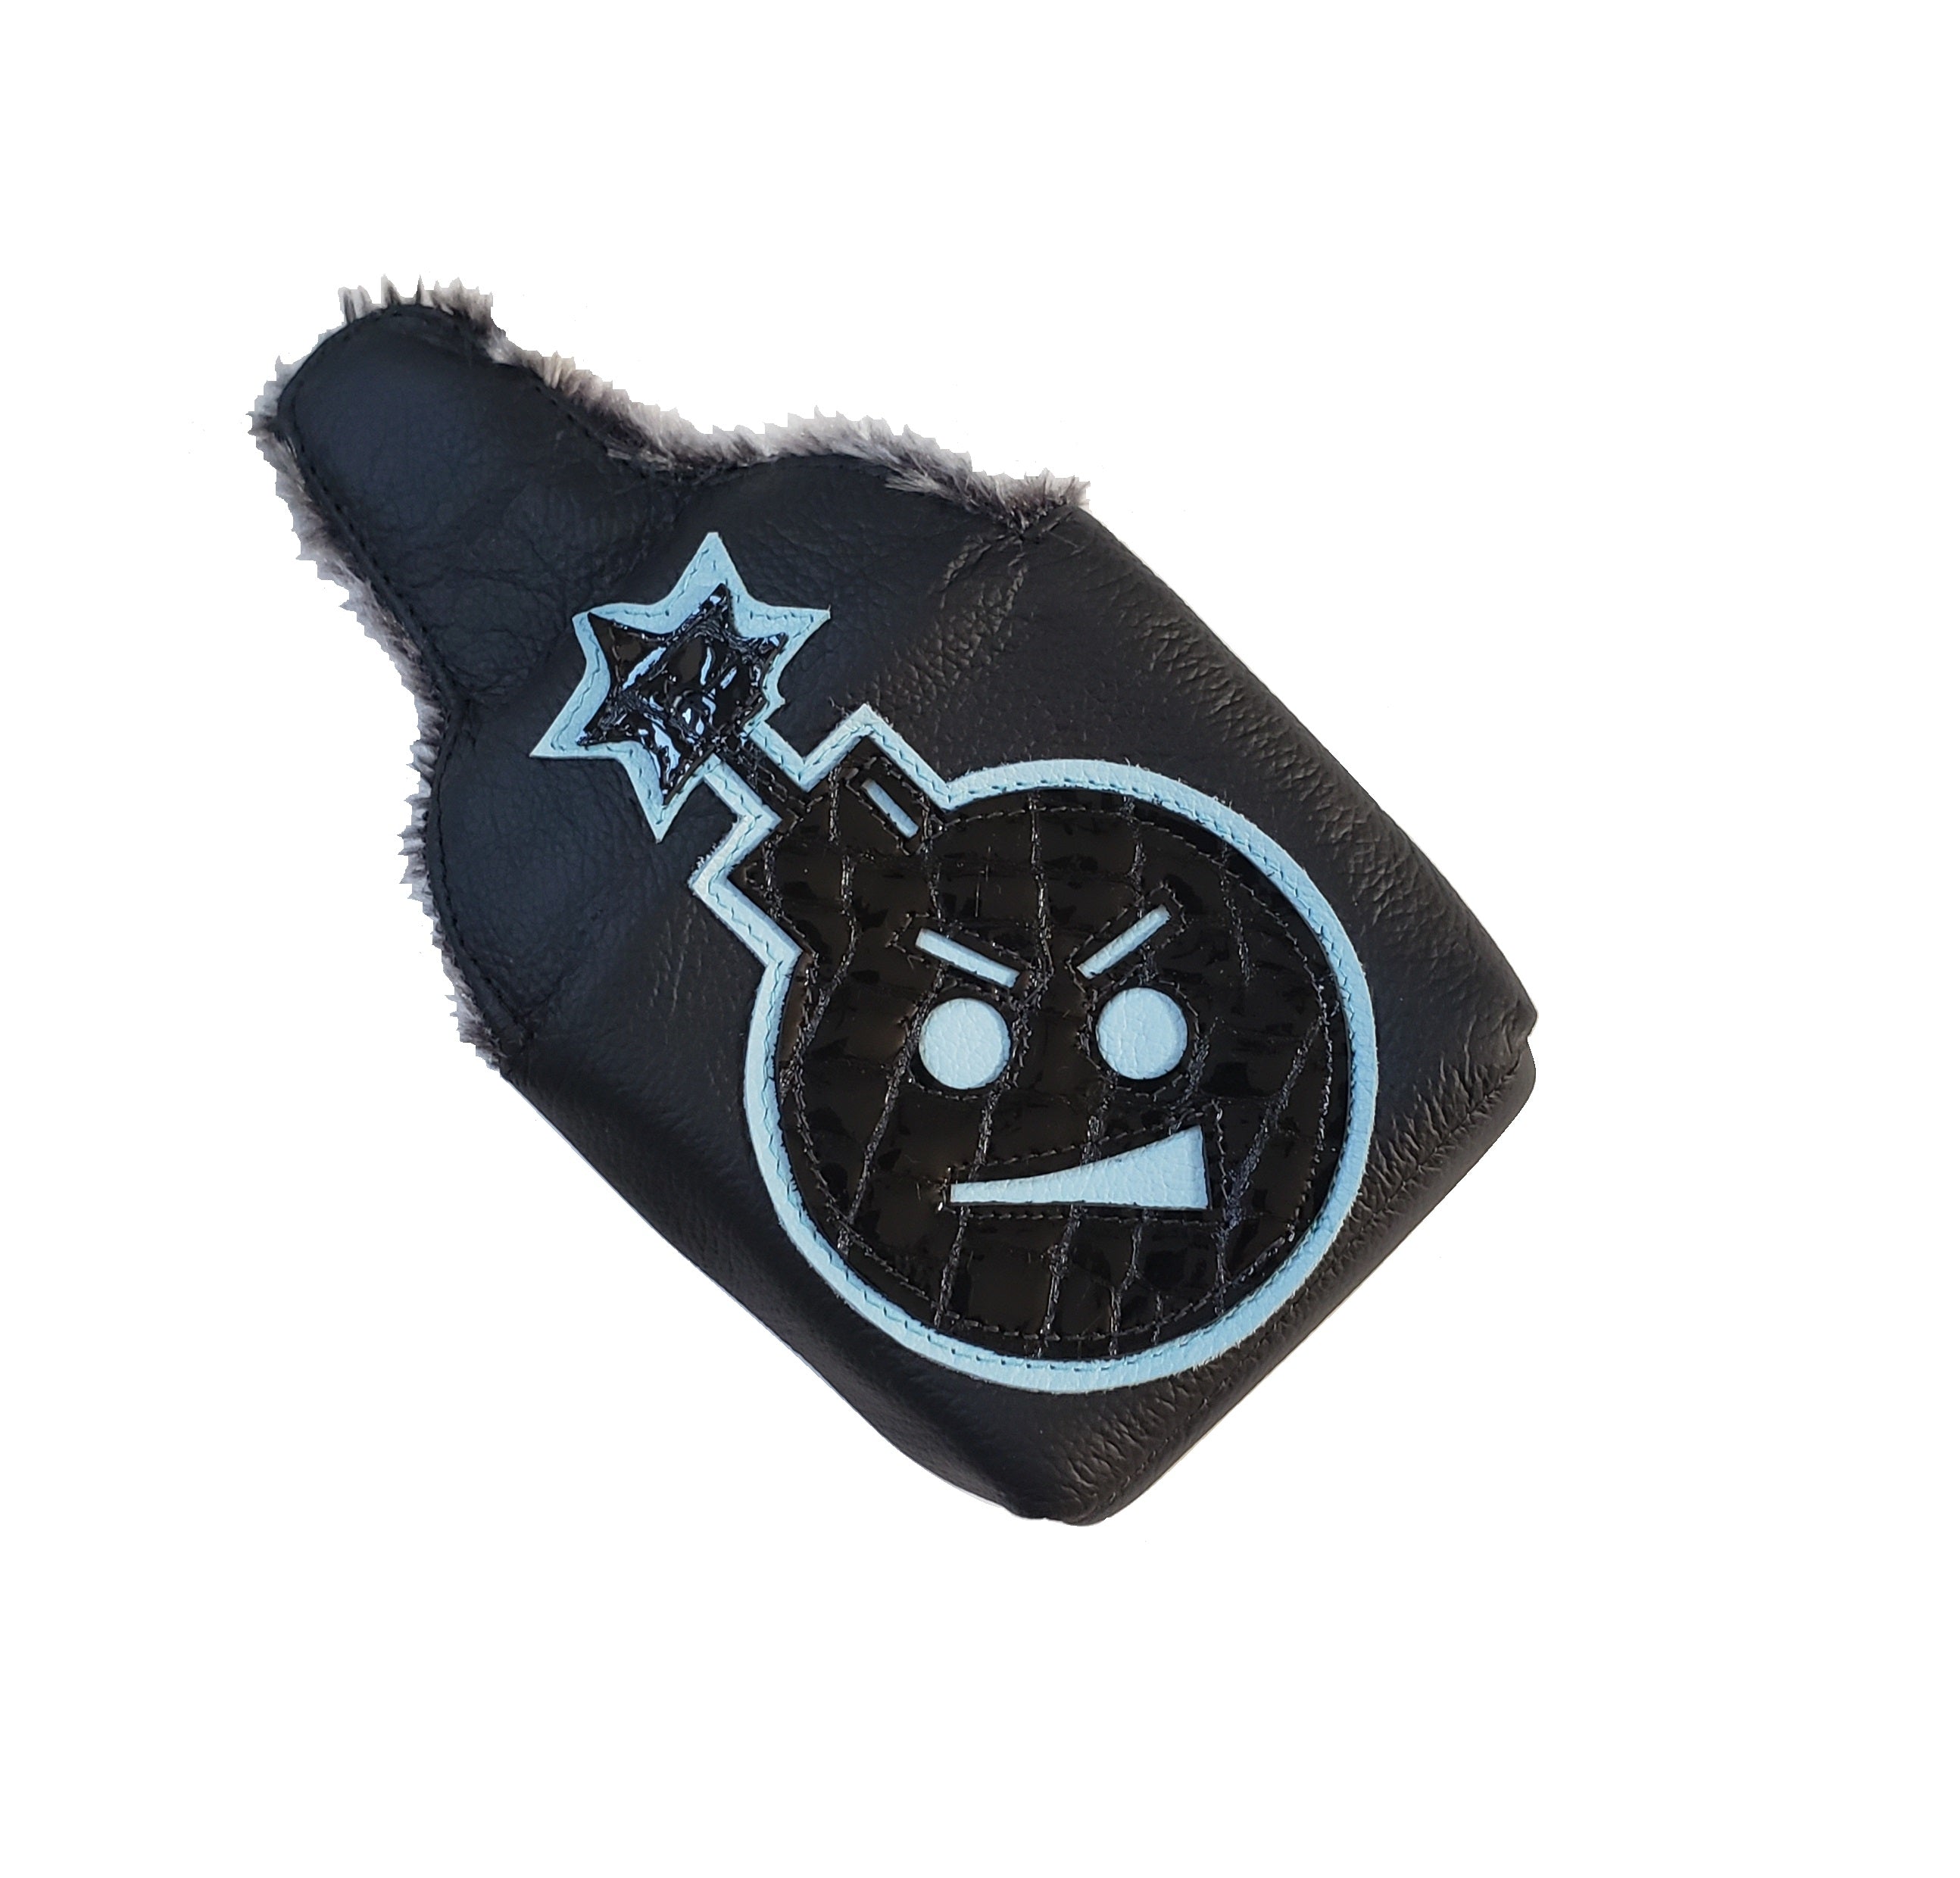 NEW! The LTD Edition "Angry Bomb" Putter Cover - Robert Mark Golf